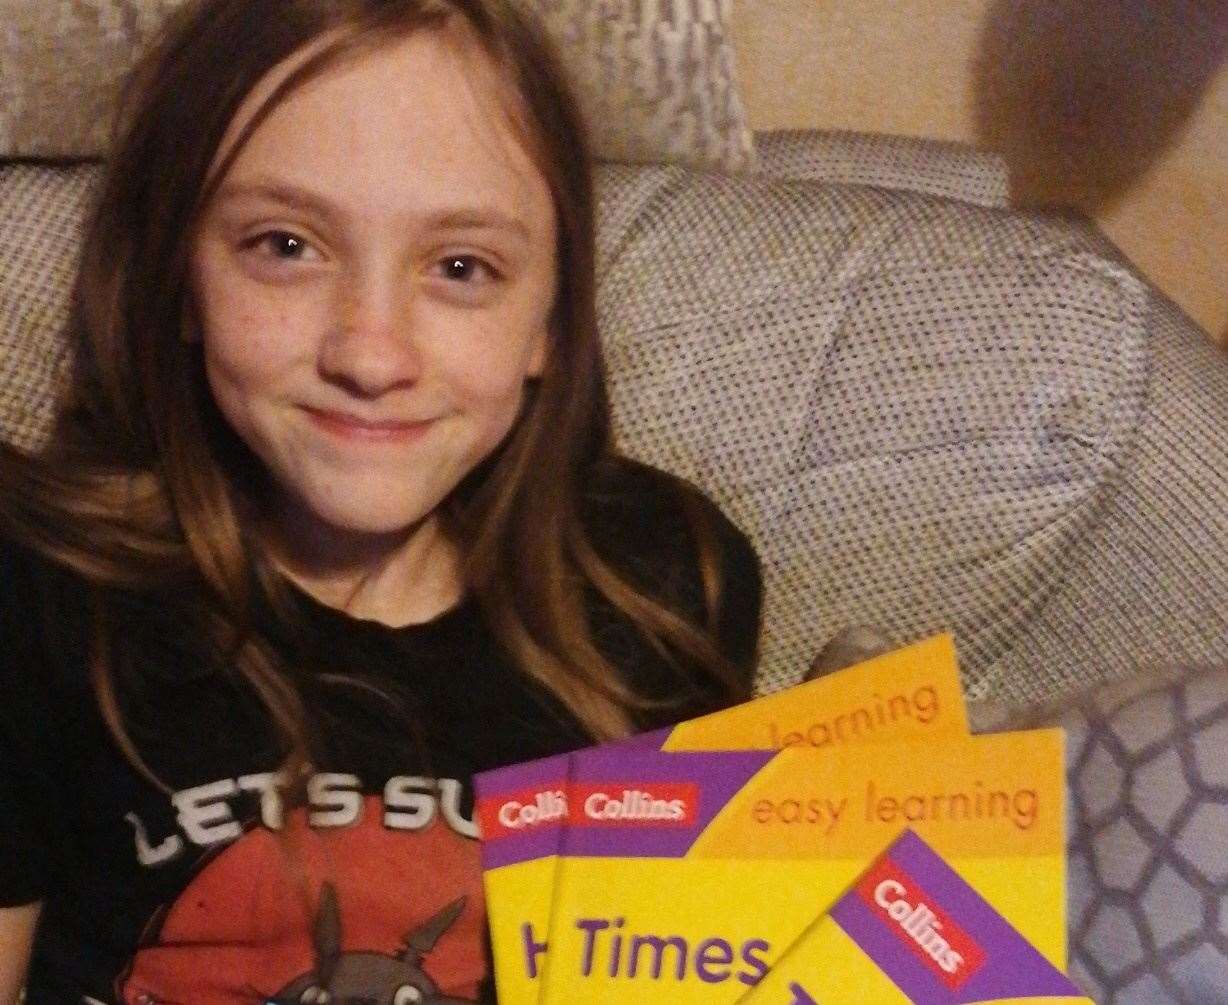 Mia with some of the books that have been purchased via the Amazon Wish List since she put an appeal out